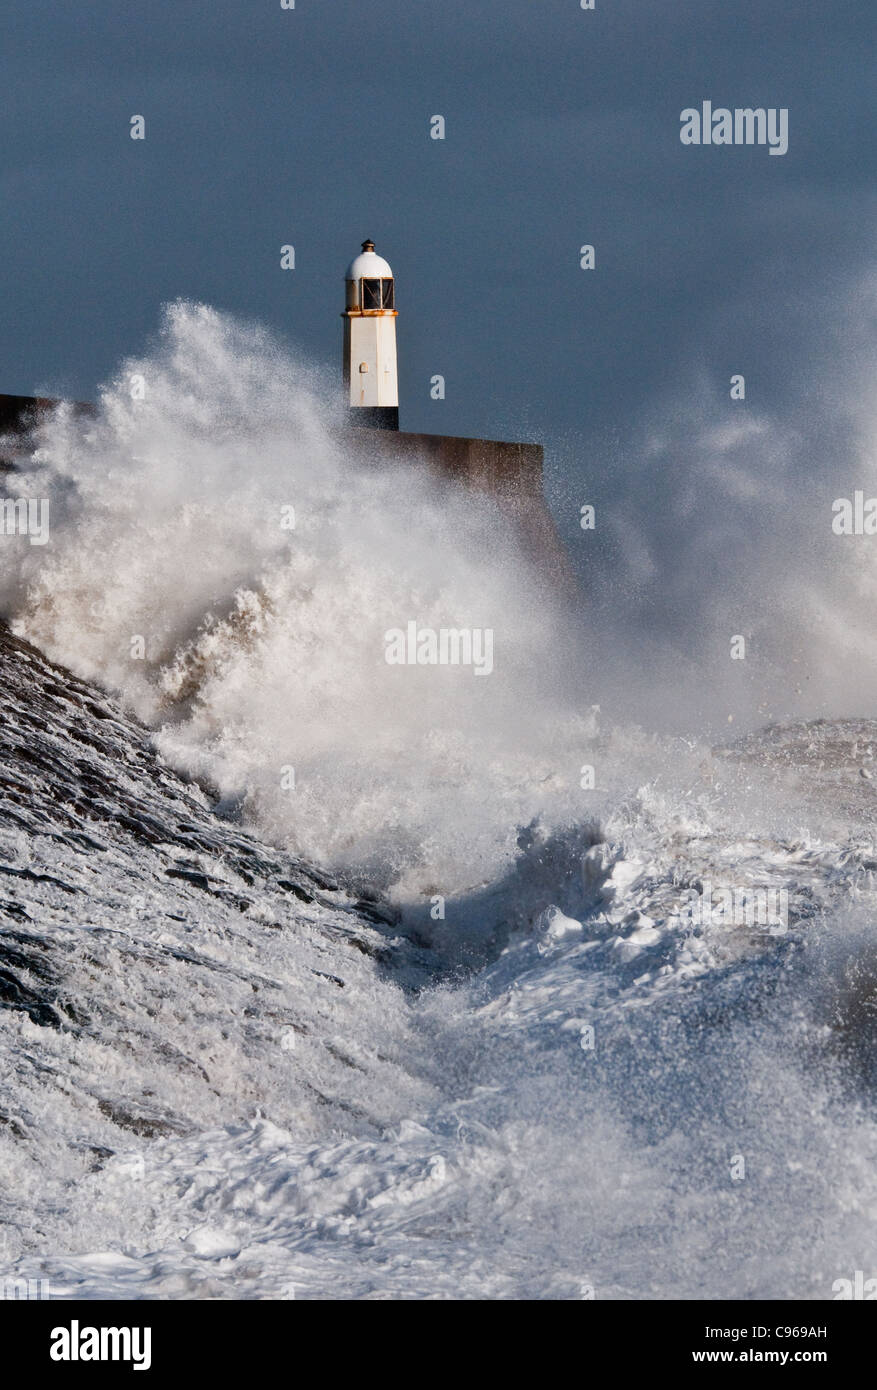 Very Rough Seas at Porthcawl in south Wales UK Stock Photo